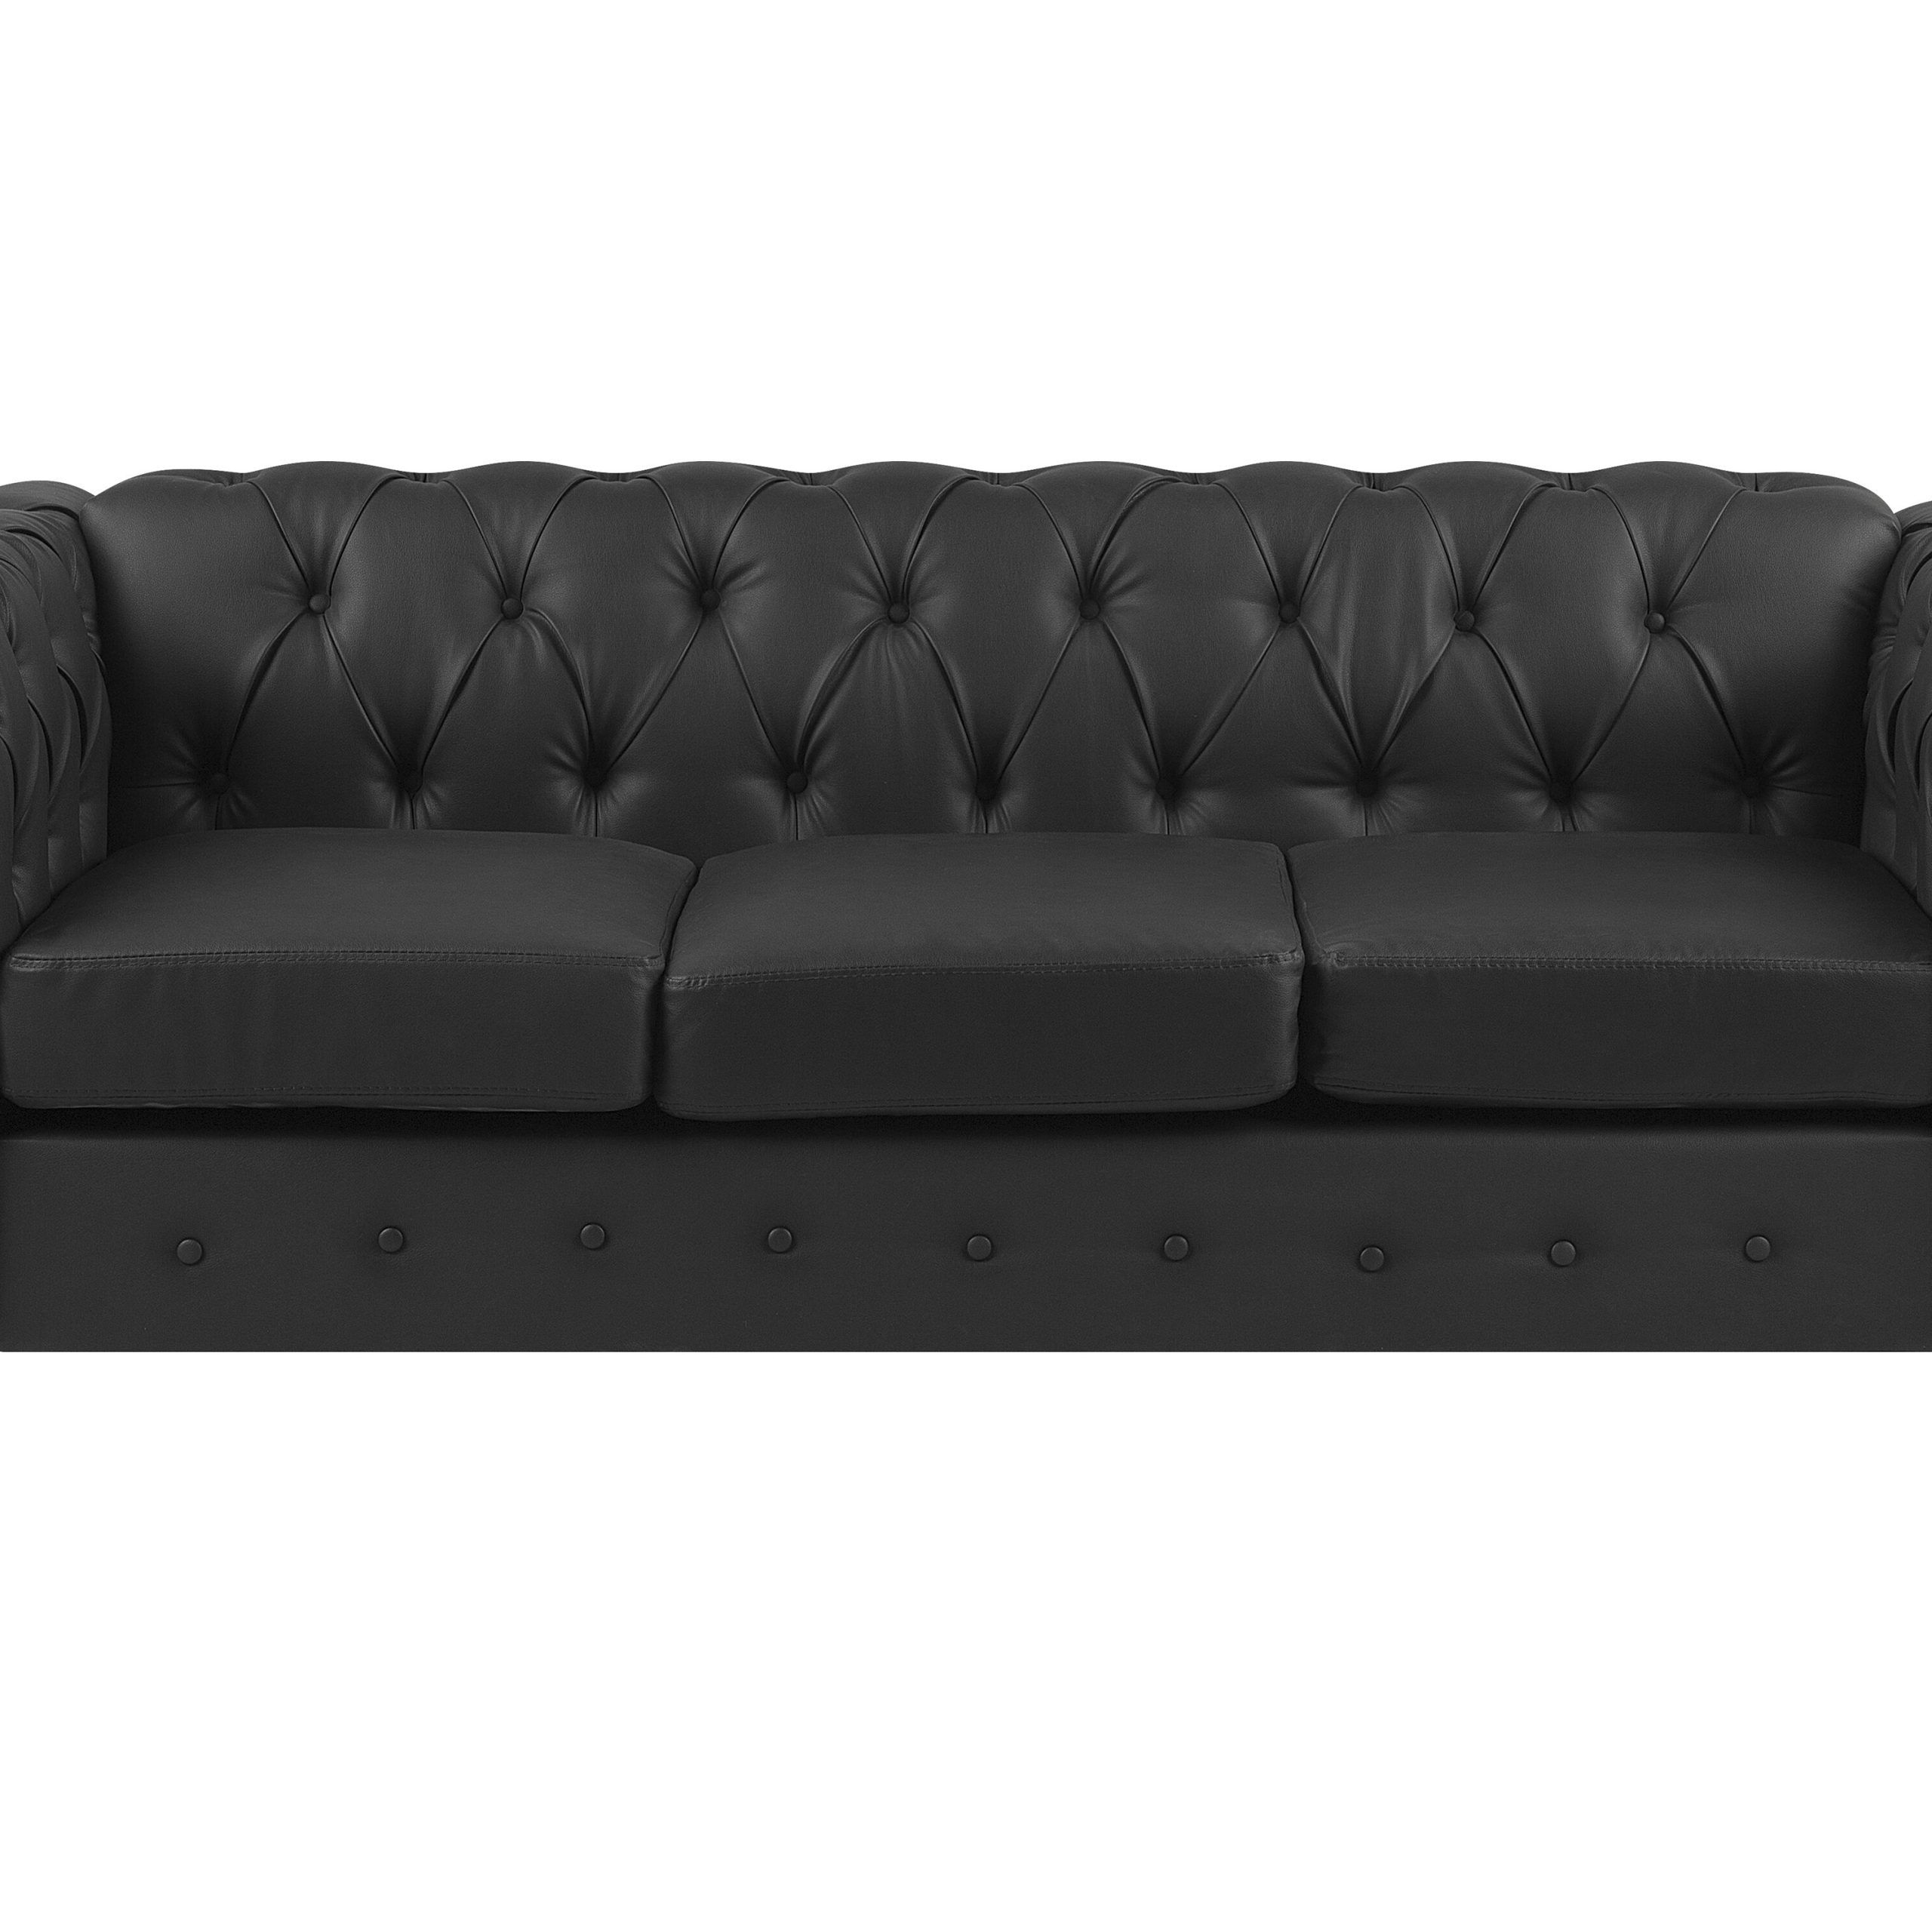 3 Seater Faux Leather Sofa Black Chesterfield | Beliani (View 12 of 20)